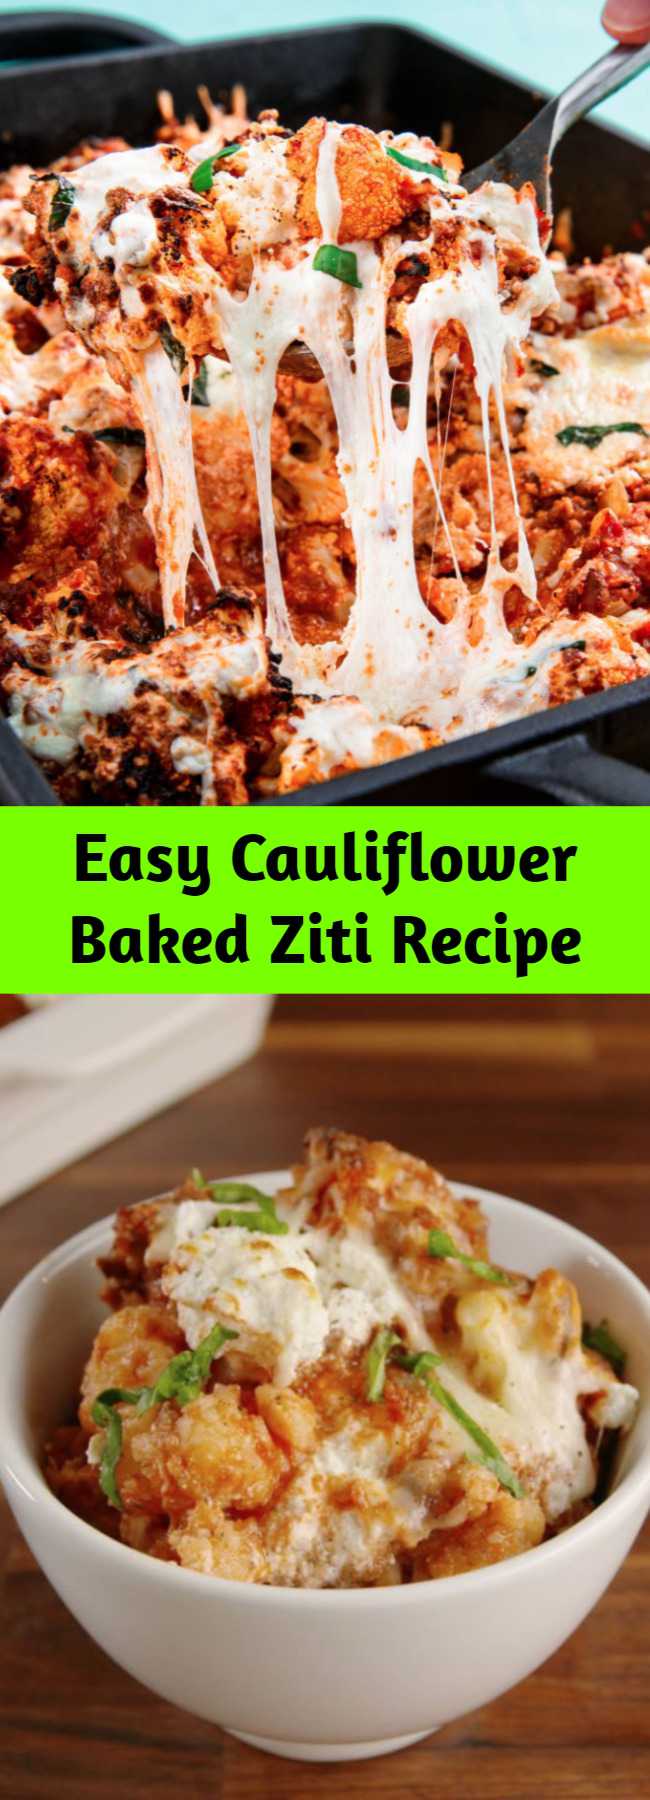 Easy Cauliflower Baked Ziti Recipe - There's not actually any ziti in this recipe. But you honestly won't even notice. The blanched cauliflower does a fine job of replacing the pasta. Just make sure to drain it well before tossing it with the sauce. #easy #recipe #cauliflower #healthy #lowcarb #baked #ziti #ricotta #cheese #diet #filling #hearty